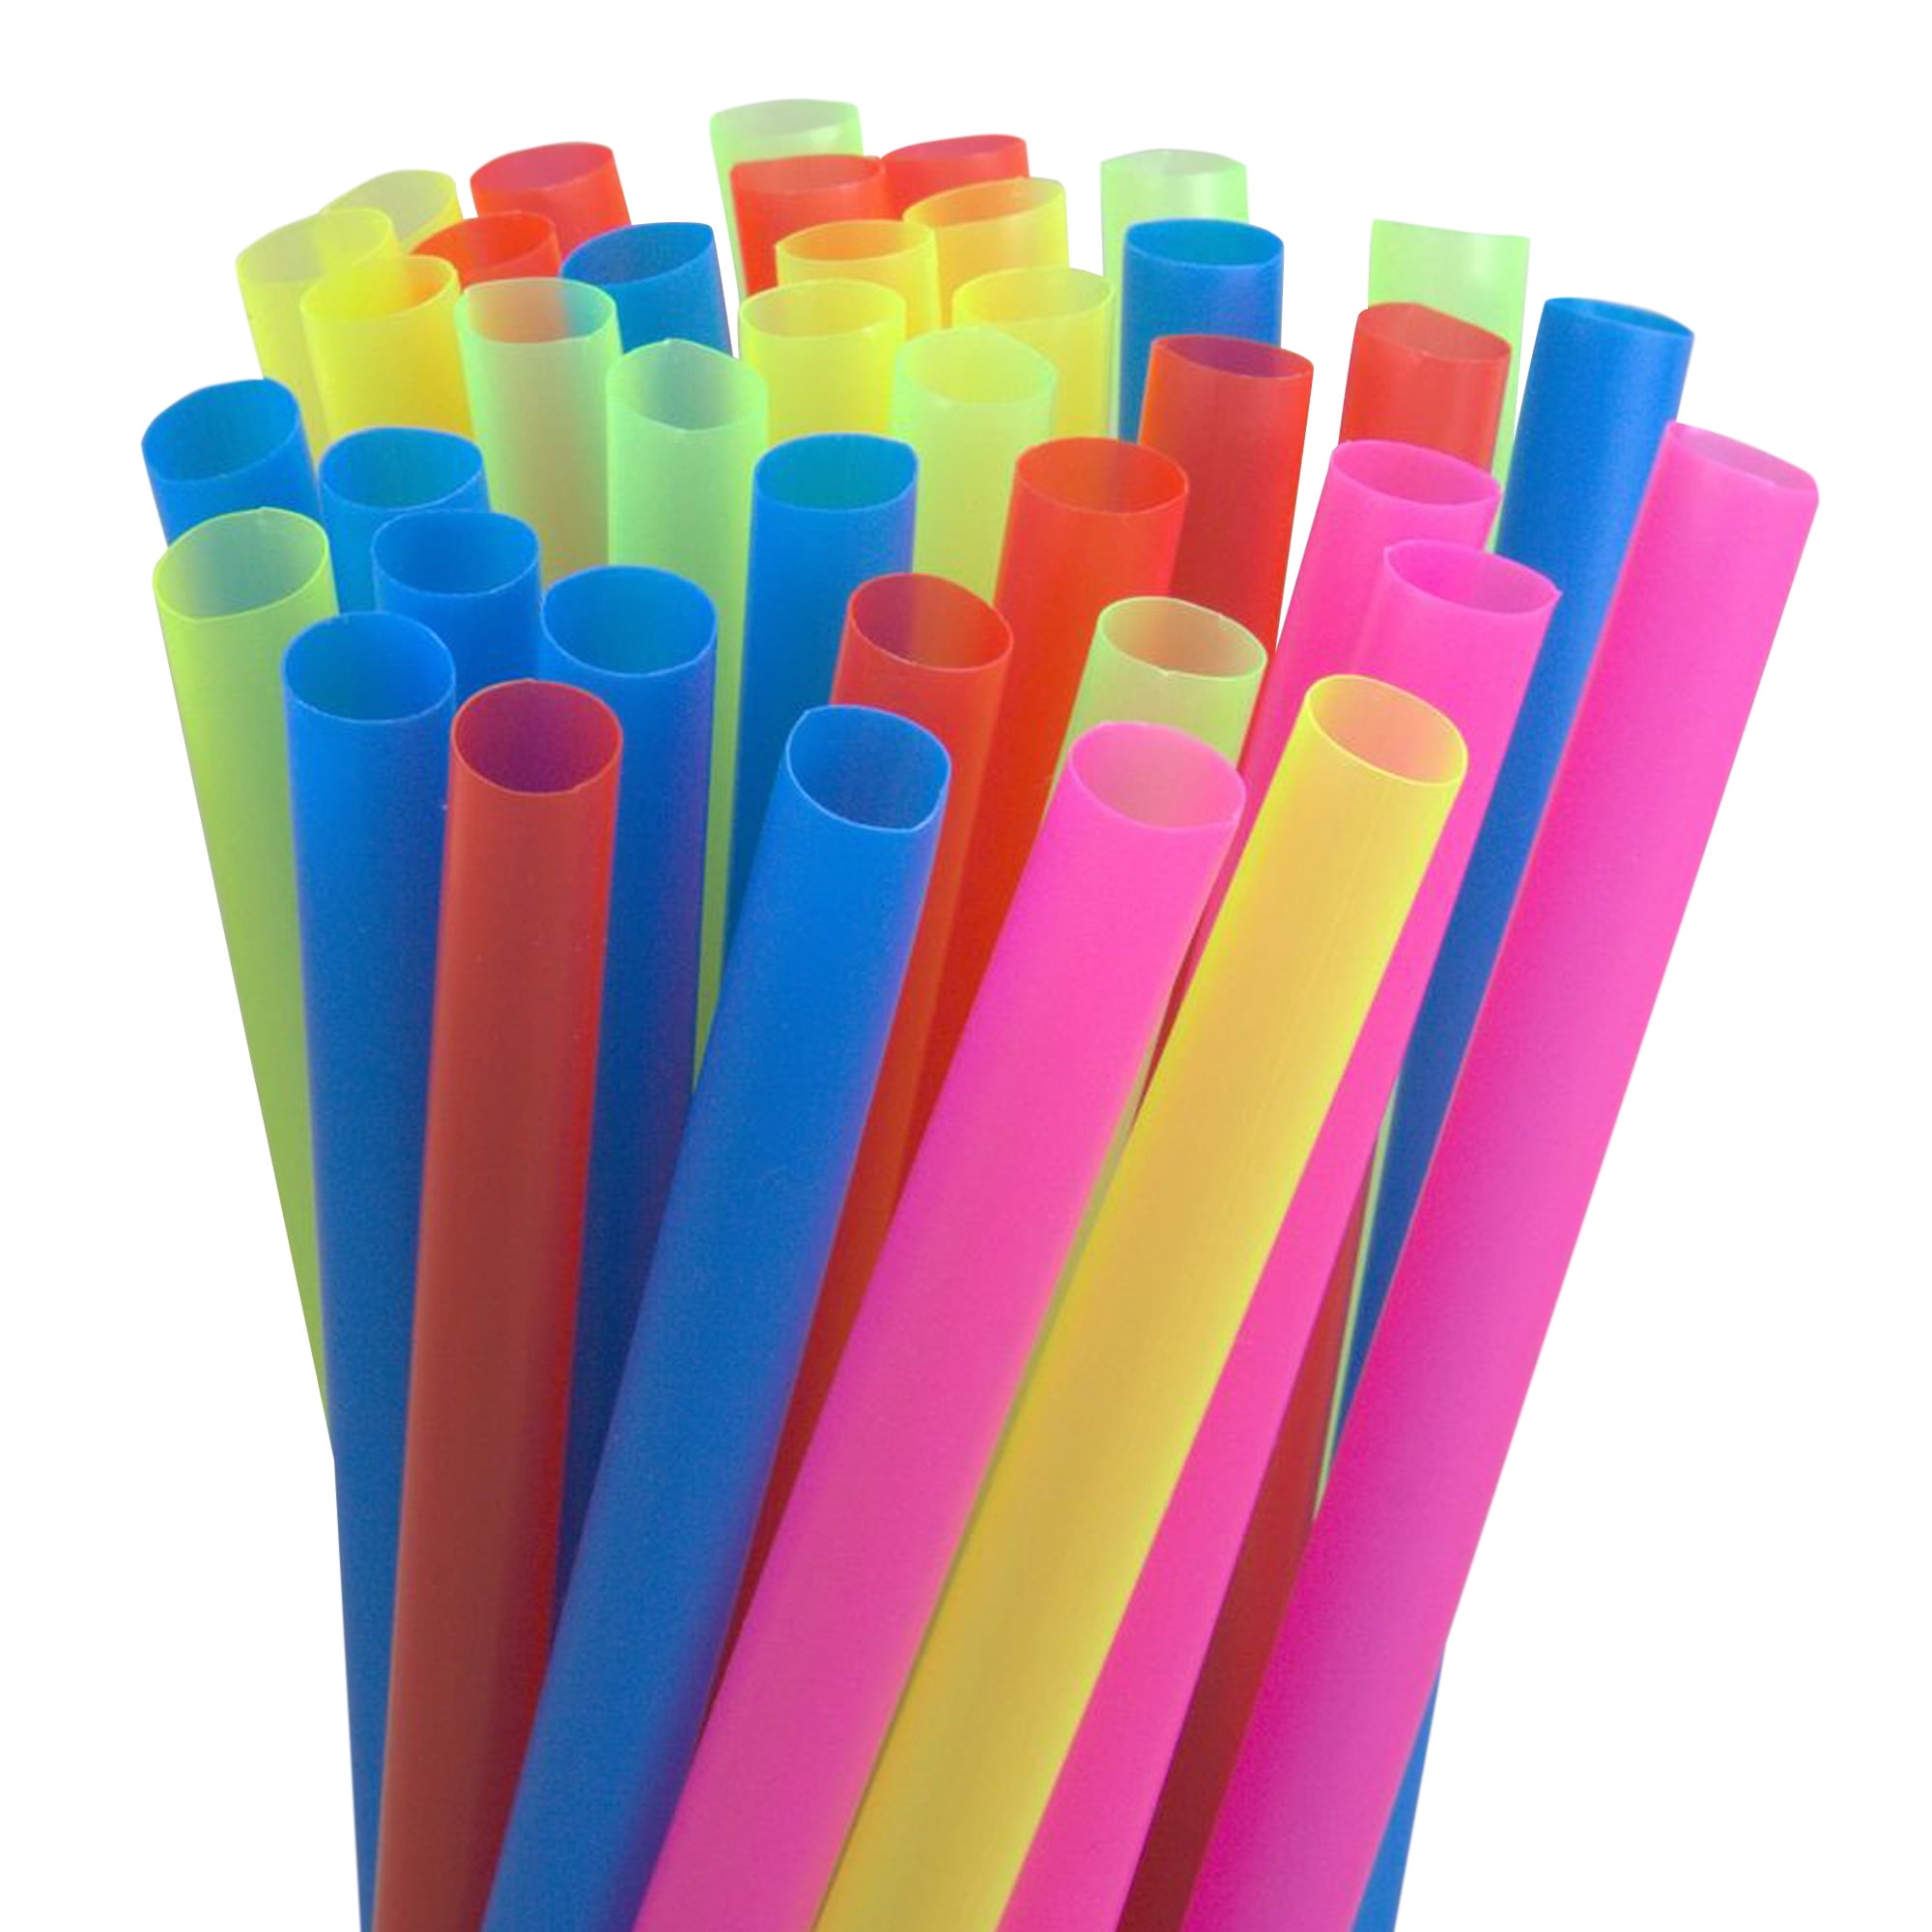 1/2 Wide X 8 1/2 Long NINU Plastic Boba Straws Clear 100-Pack Extra Wide Disposable Smoothie Straws for Bubble Tea 